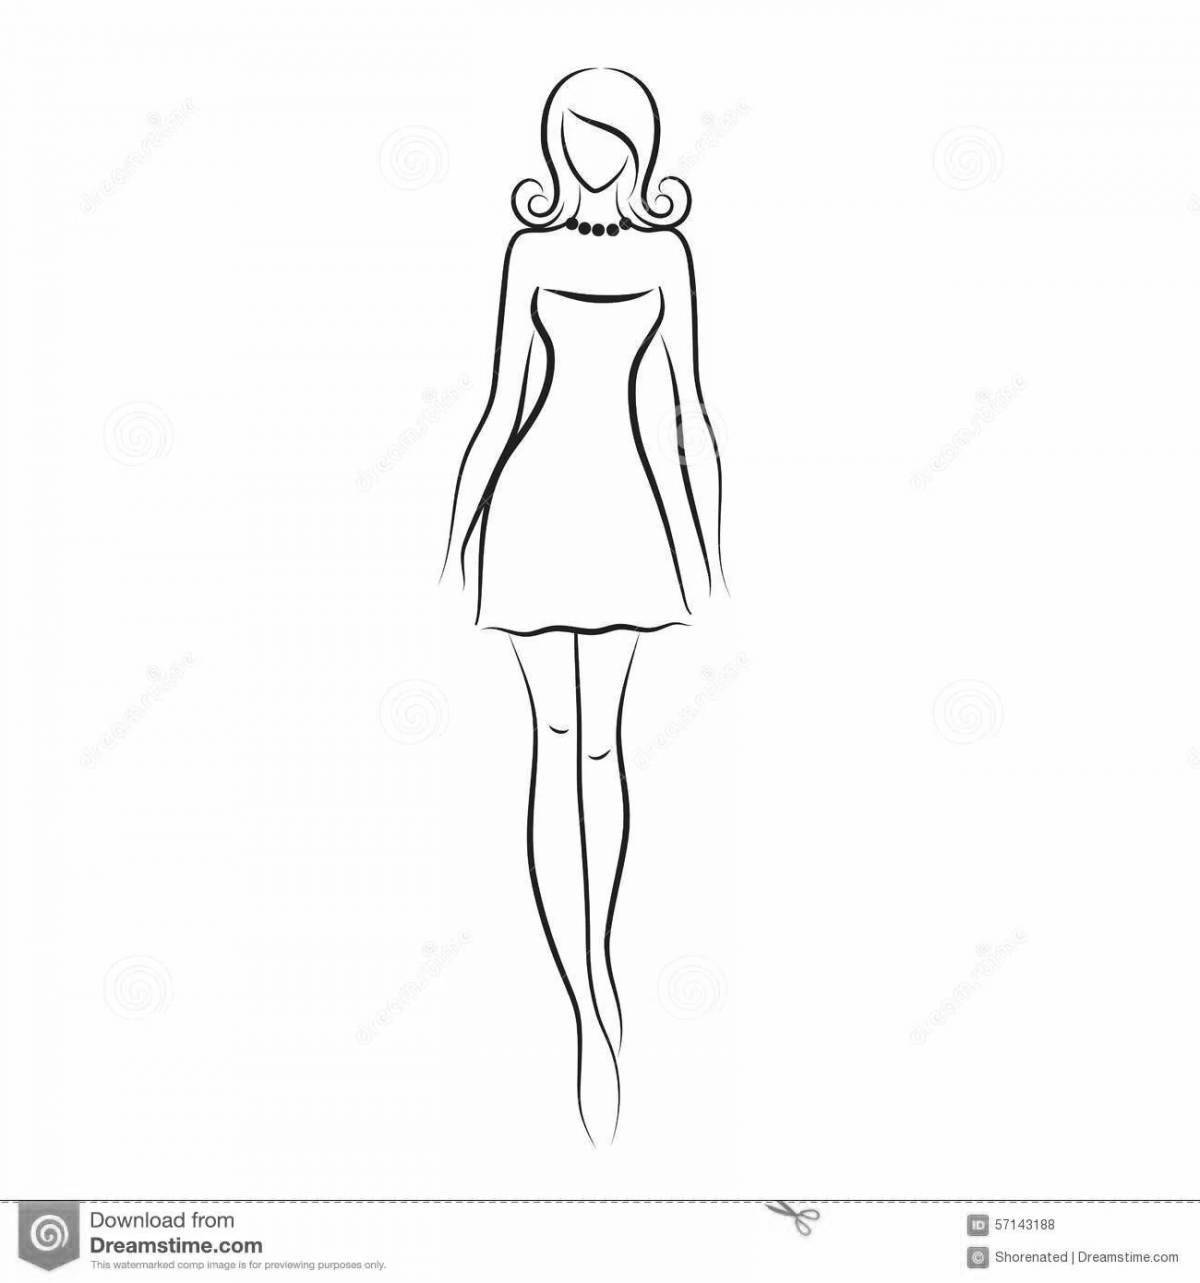 Radiant coloring page silhouette of a girl in a dress